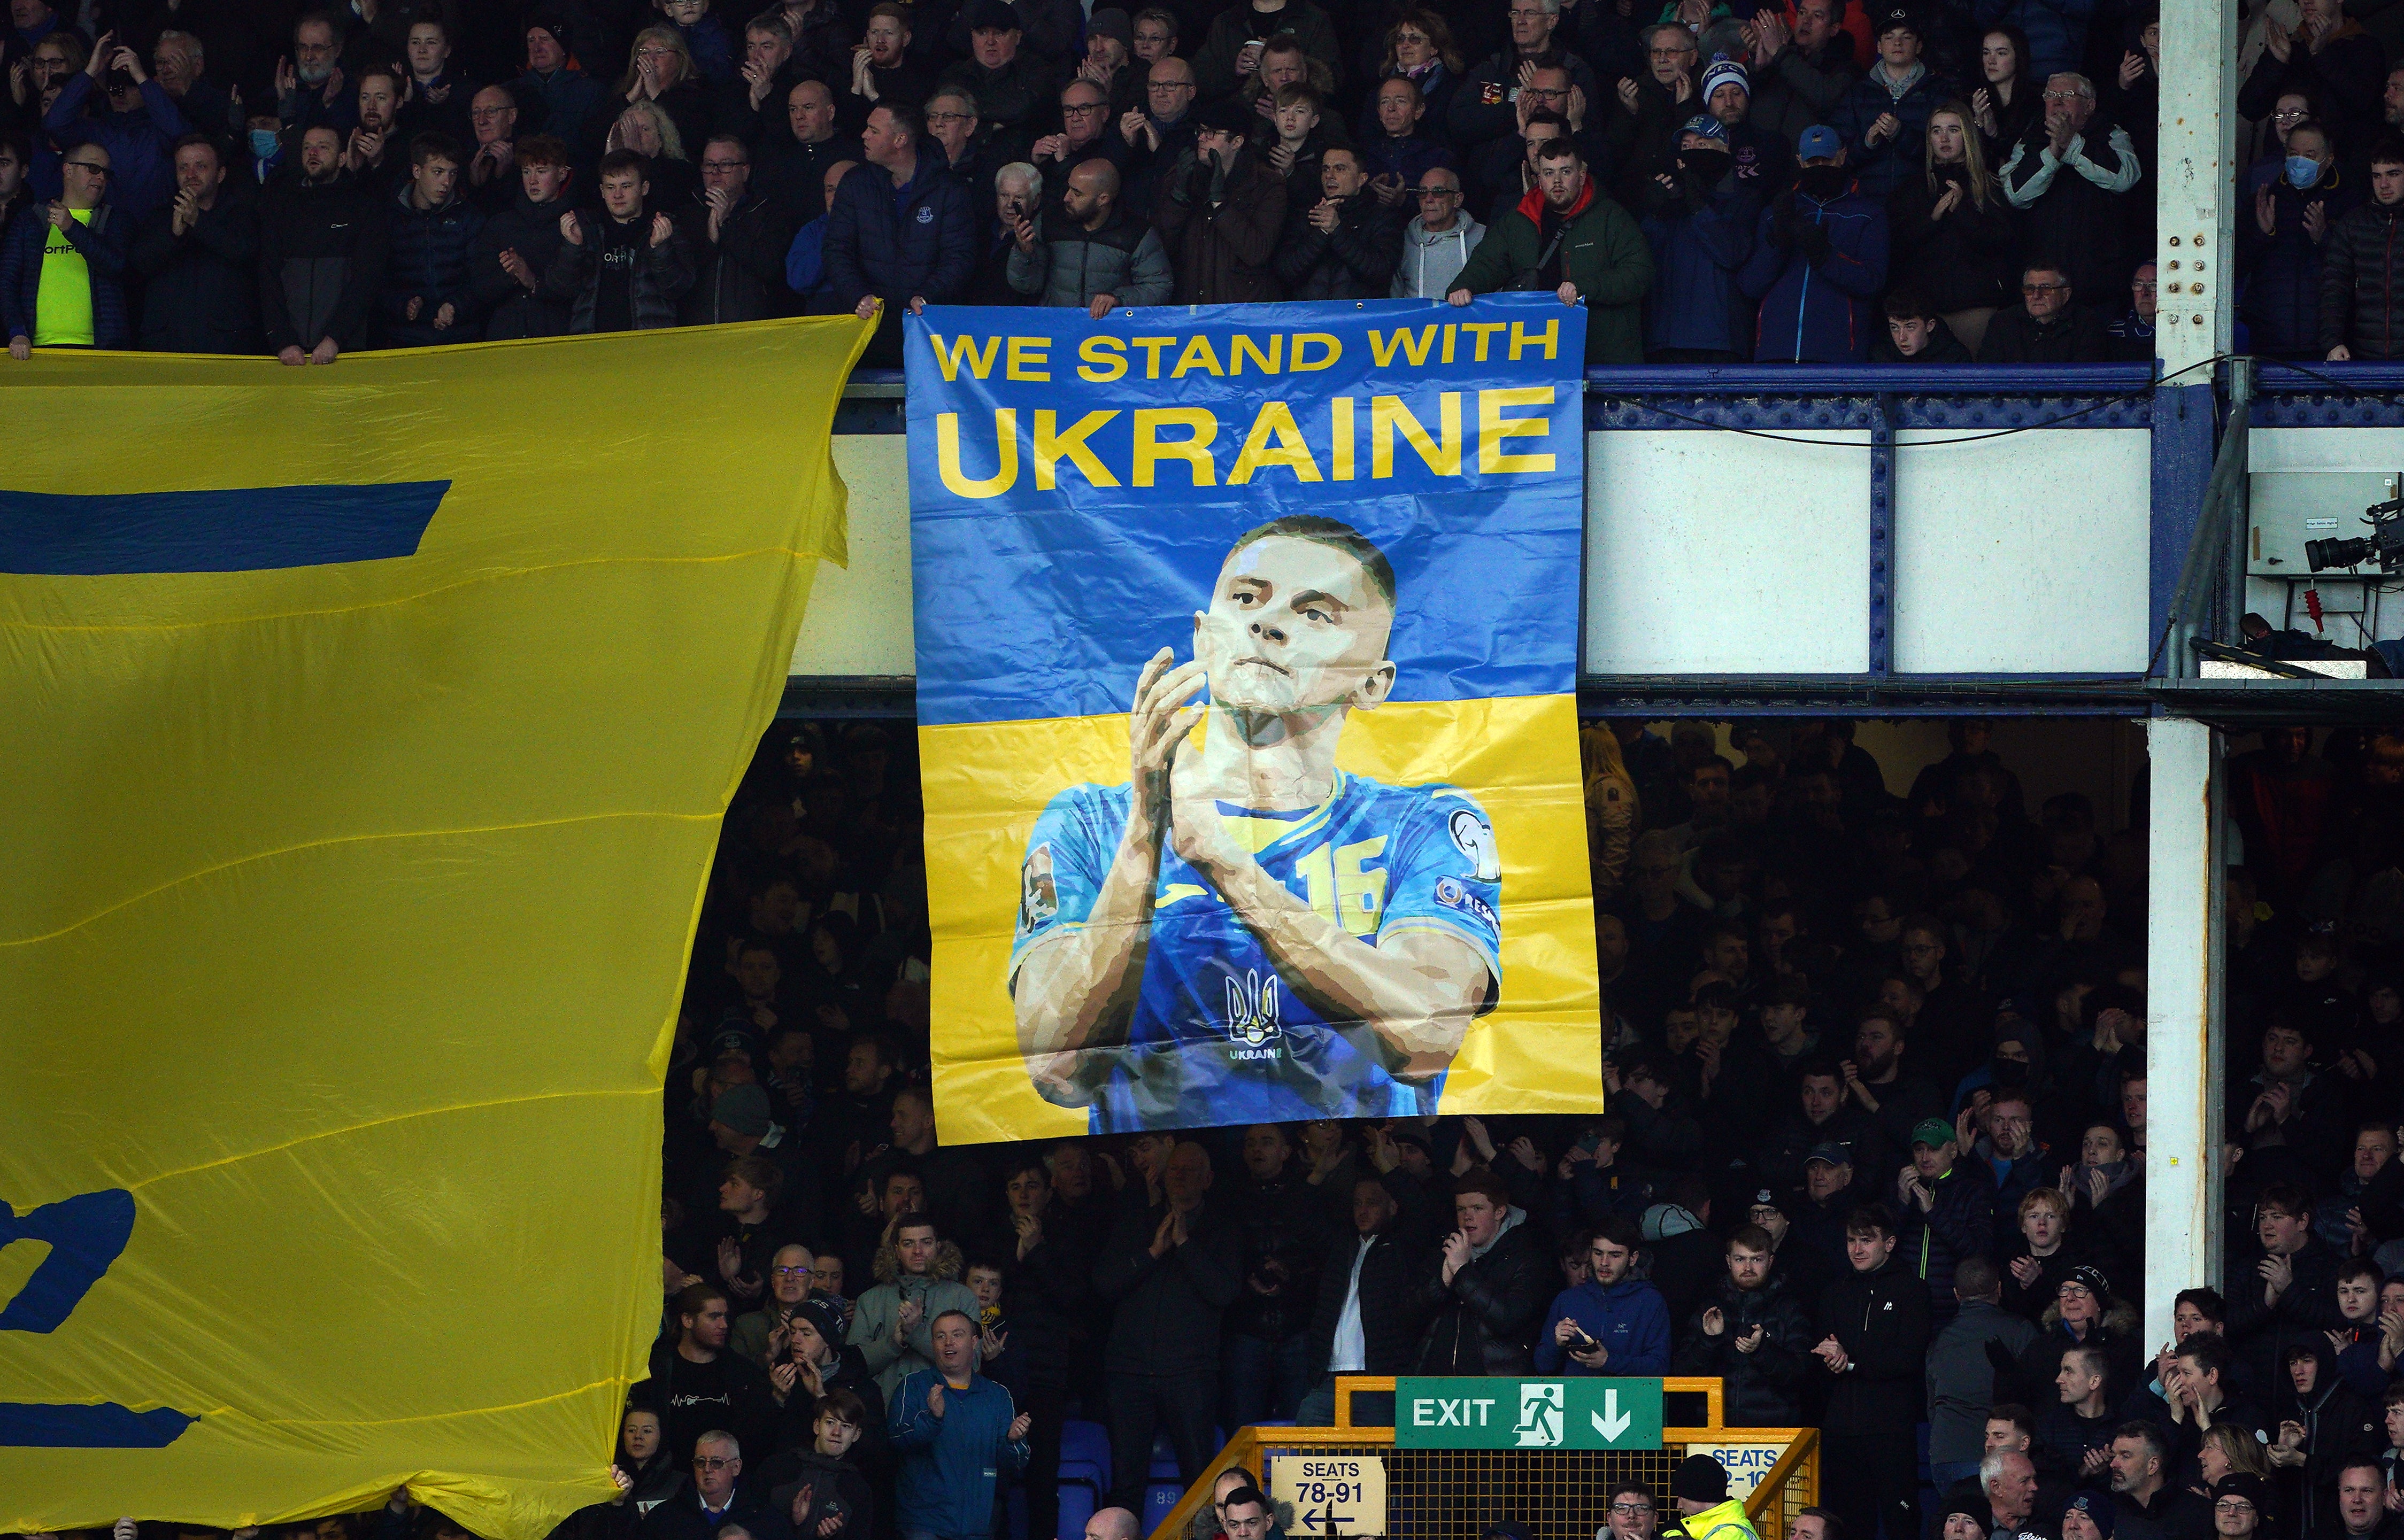 A banner in support of Everton’s Vitaliy Mykolenko and Ukraine before the Premier League match against Manchester City (Peter Byrne/PA)